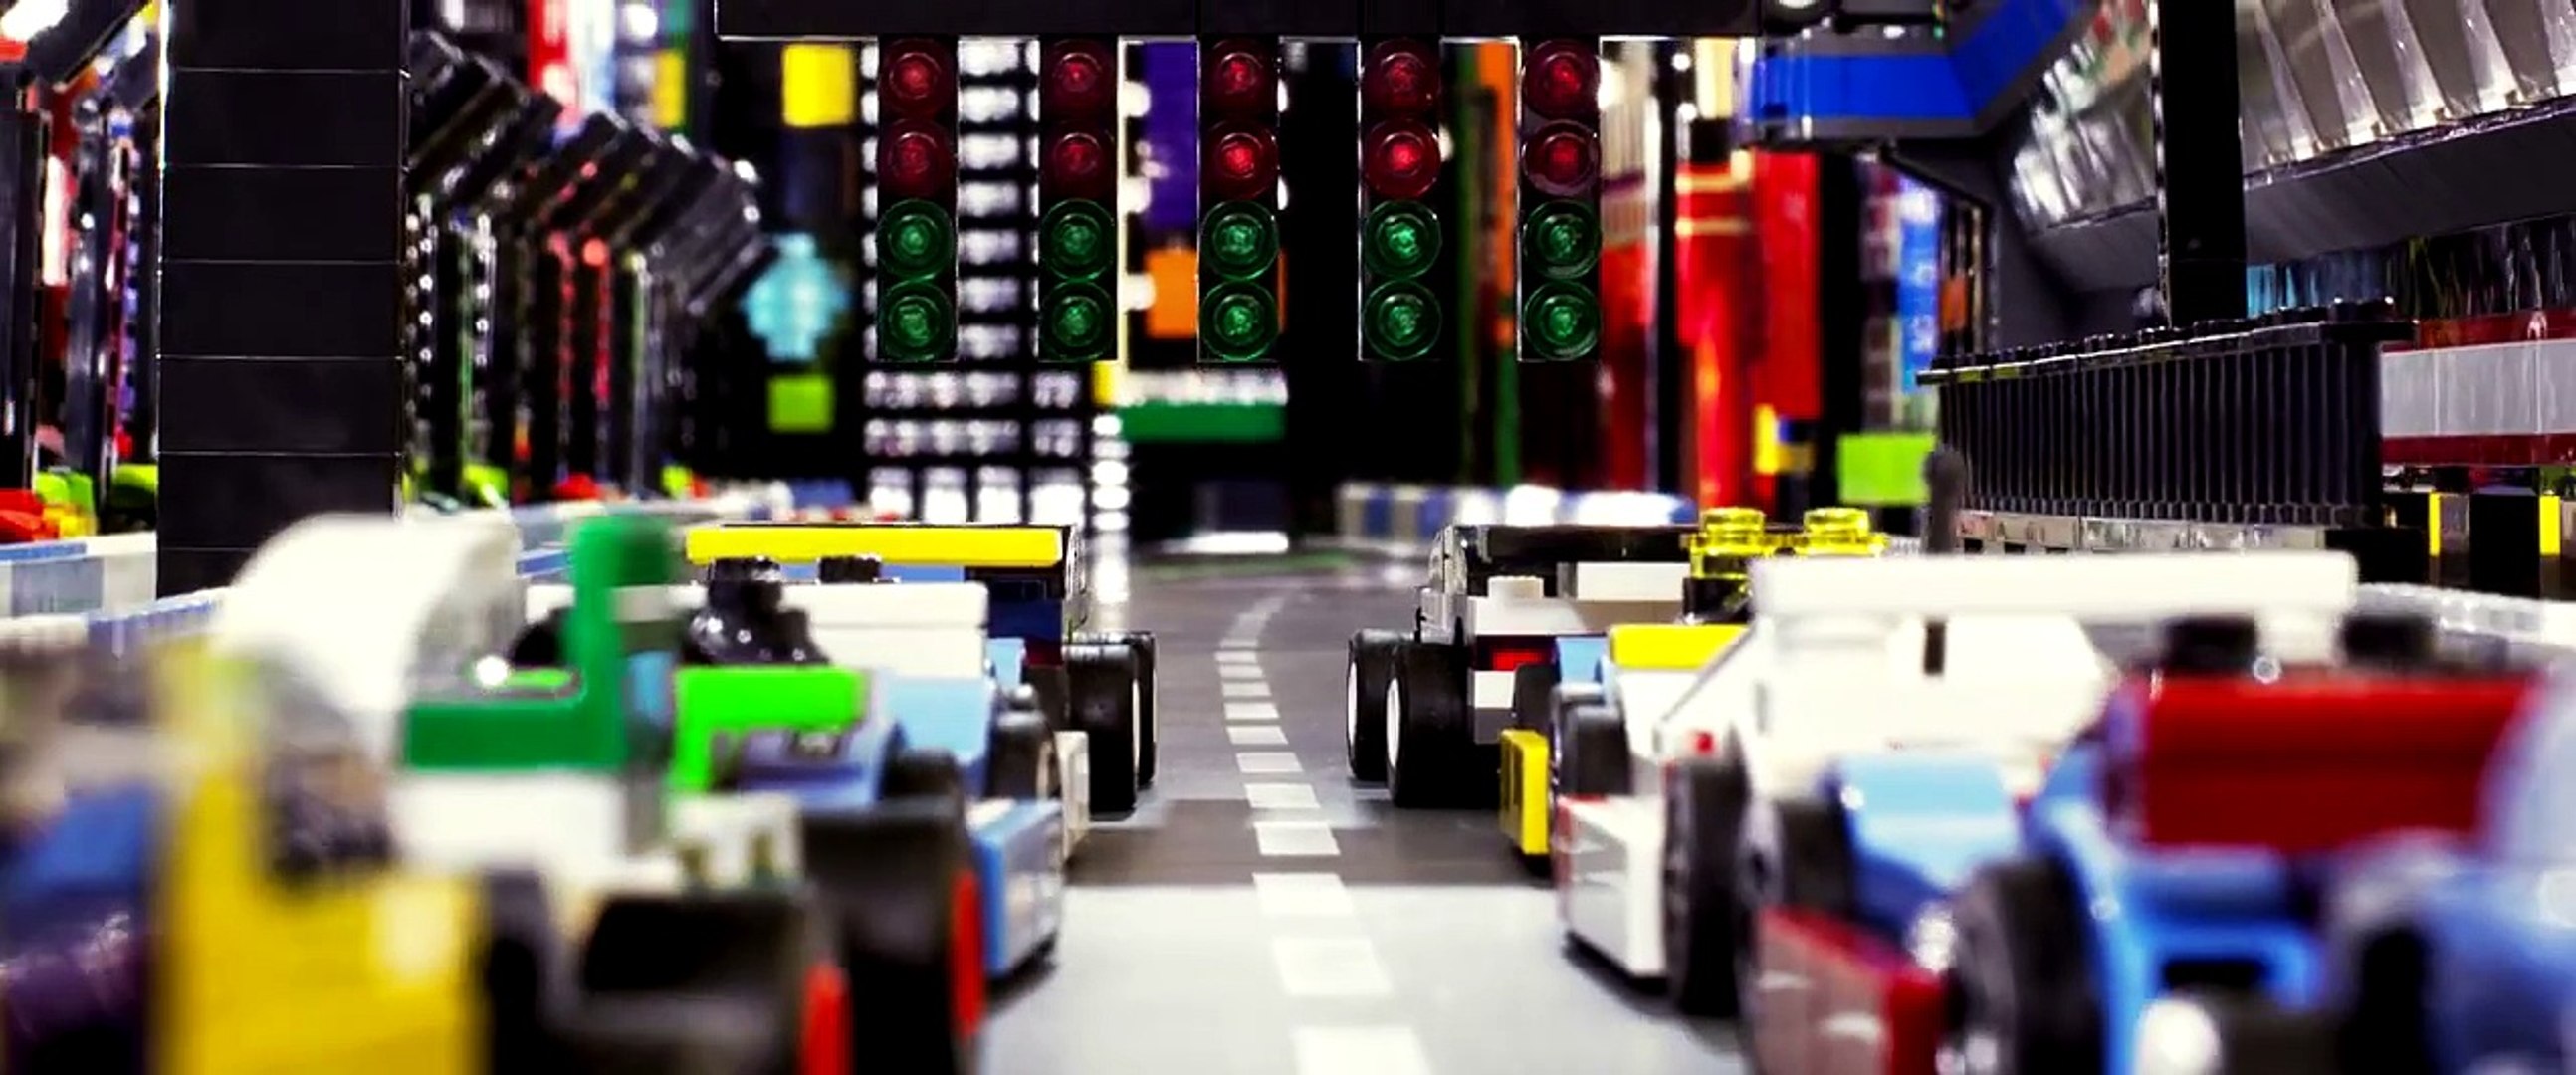 CARS 2 Movie Trailer Recreated Entirely of LEGO Brick Episode - Dailymotion  Video